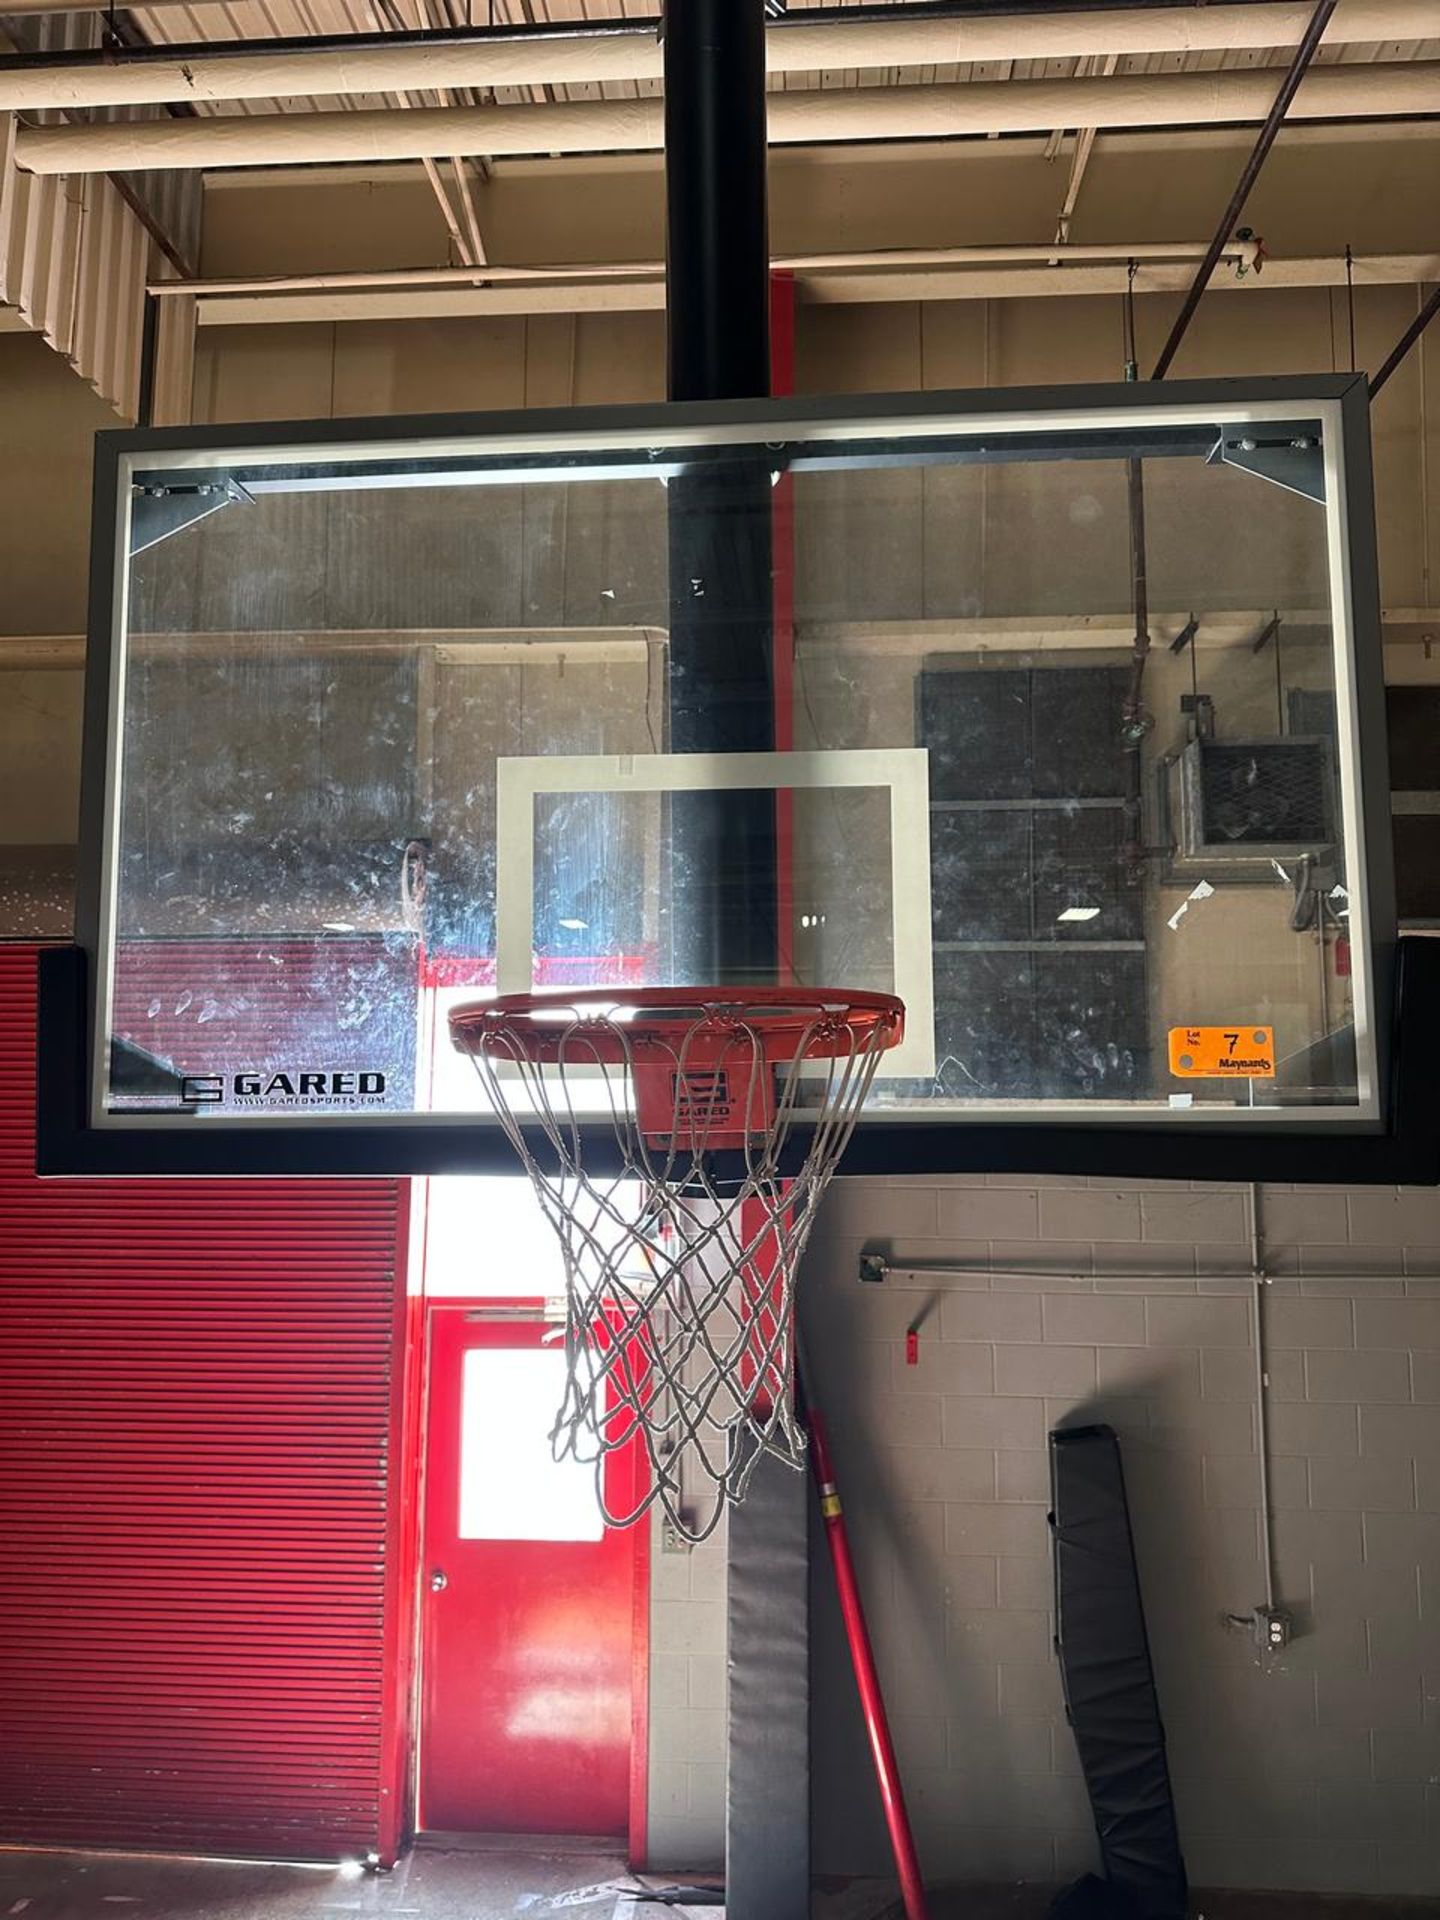 Gared Ceiling Pole Mounted Basketball Hoop - Image 2 of 3